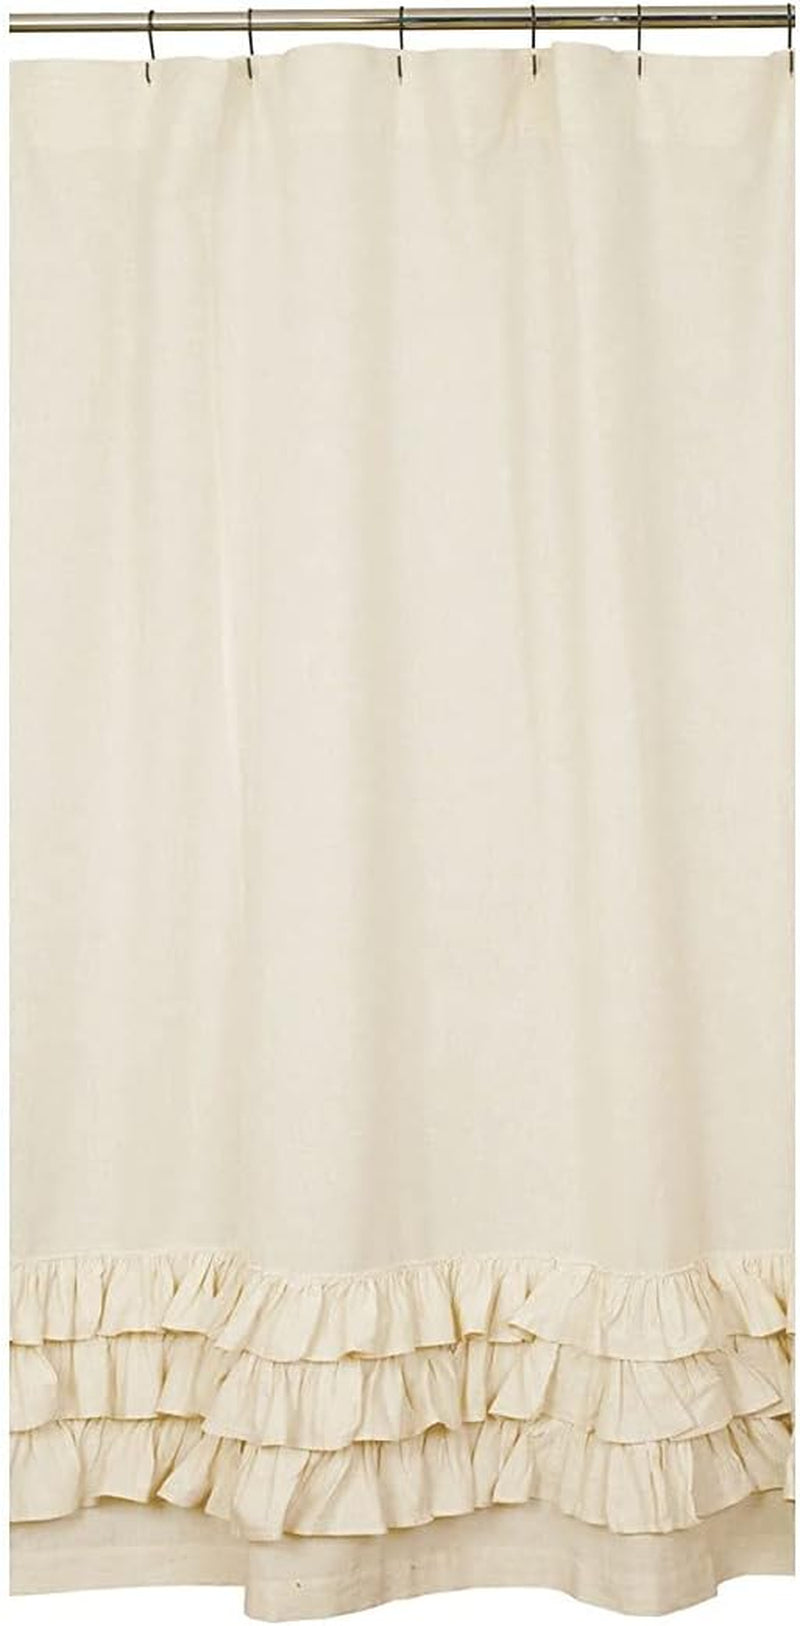 Flax Ruffled Shower Curtain by the Country House Collection, 72" X 72"  Country House Collection   